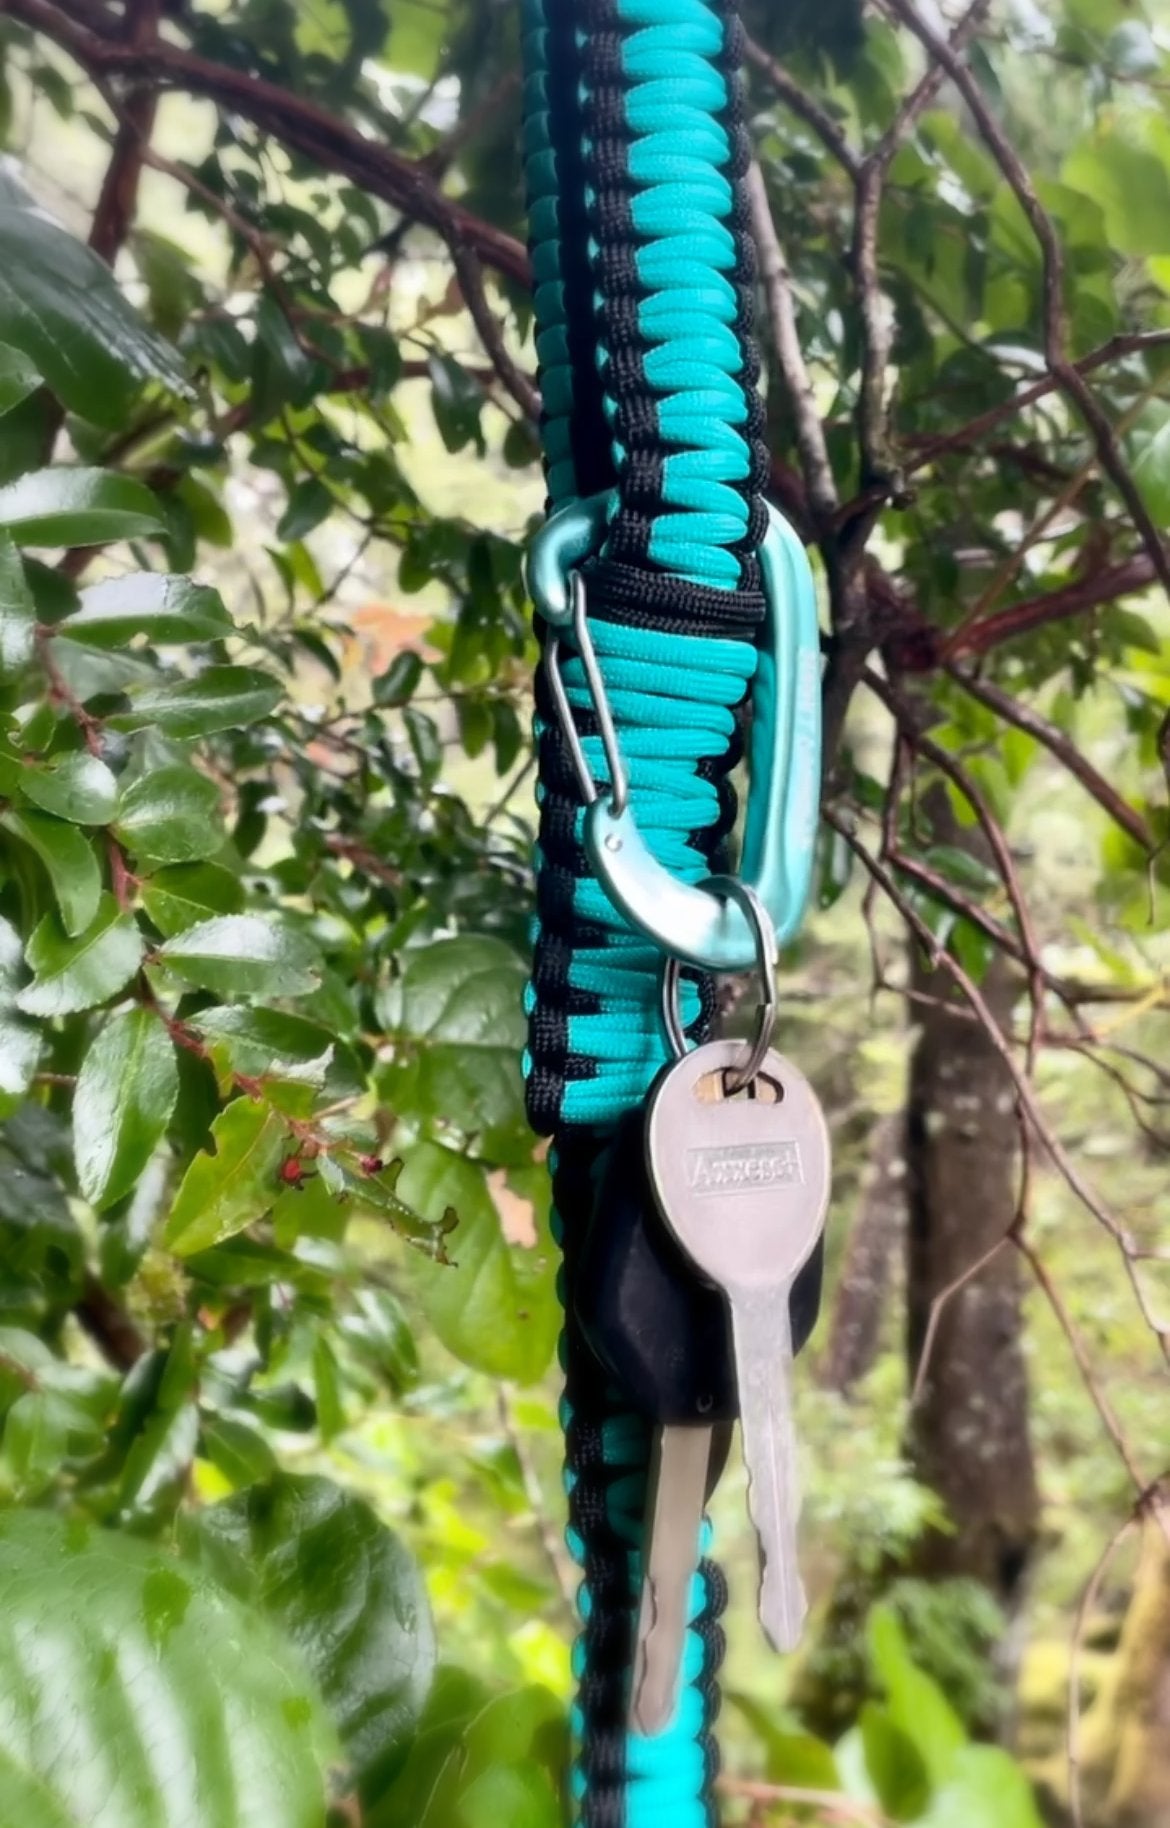 Against ordinary carabiner clipped to a leash with subaru keys